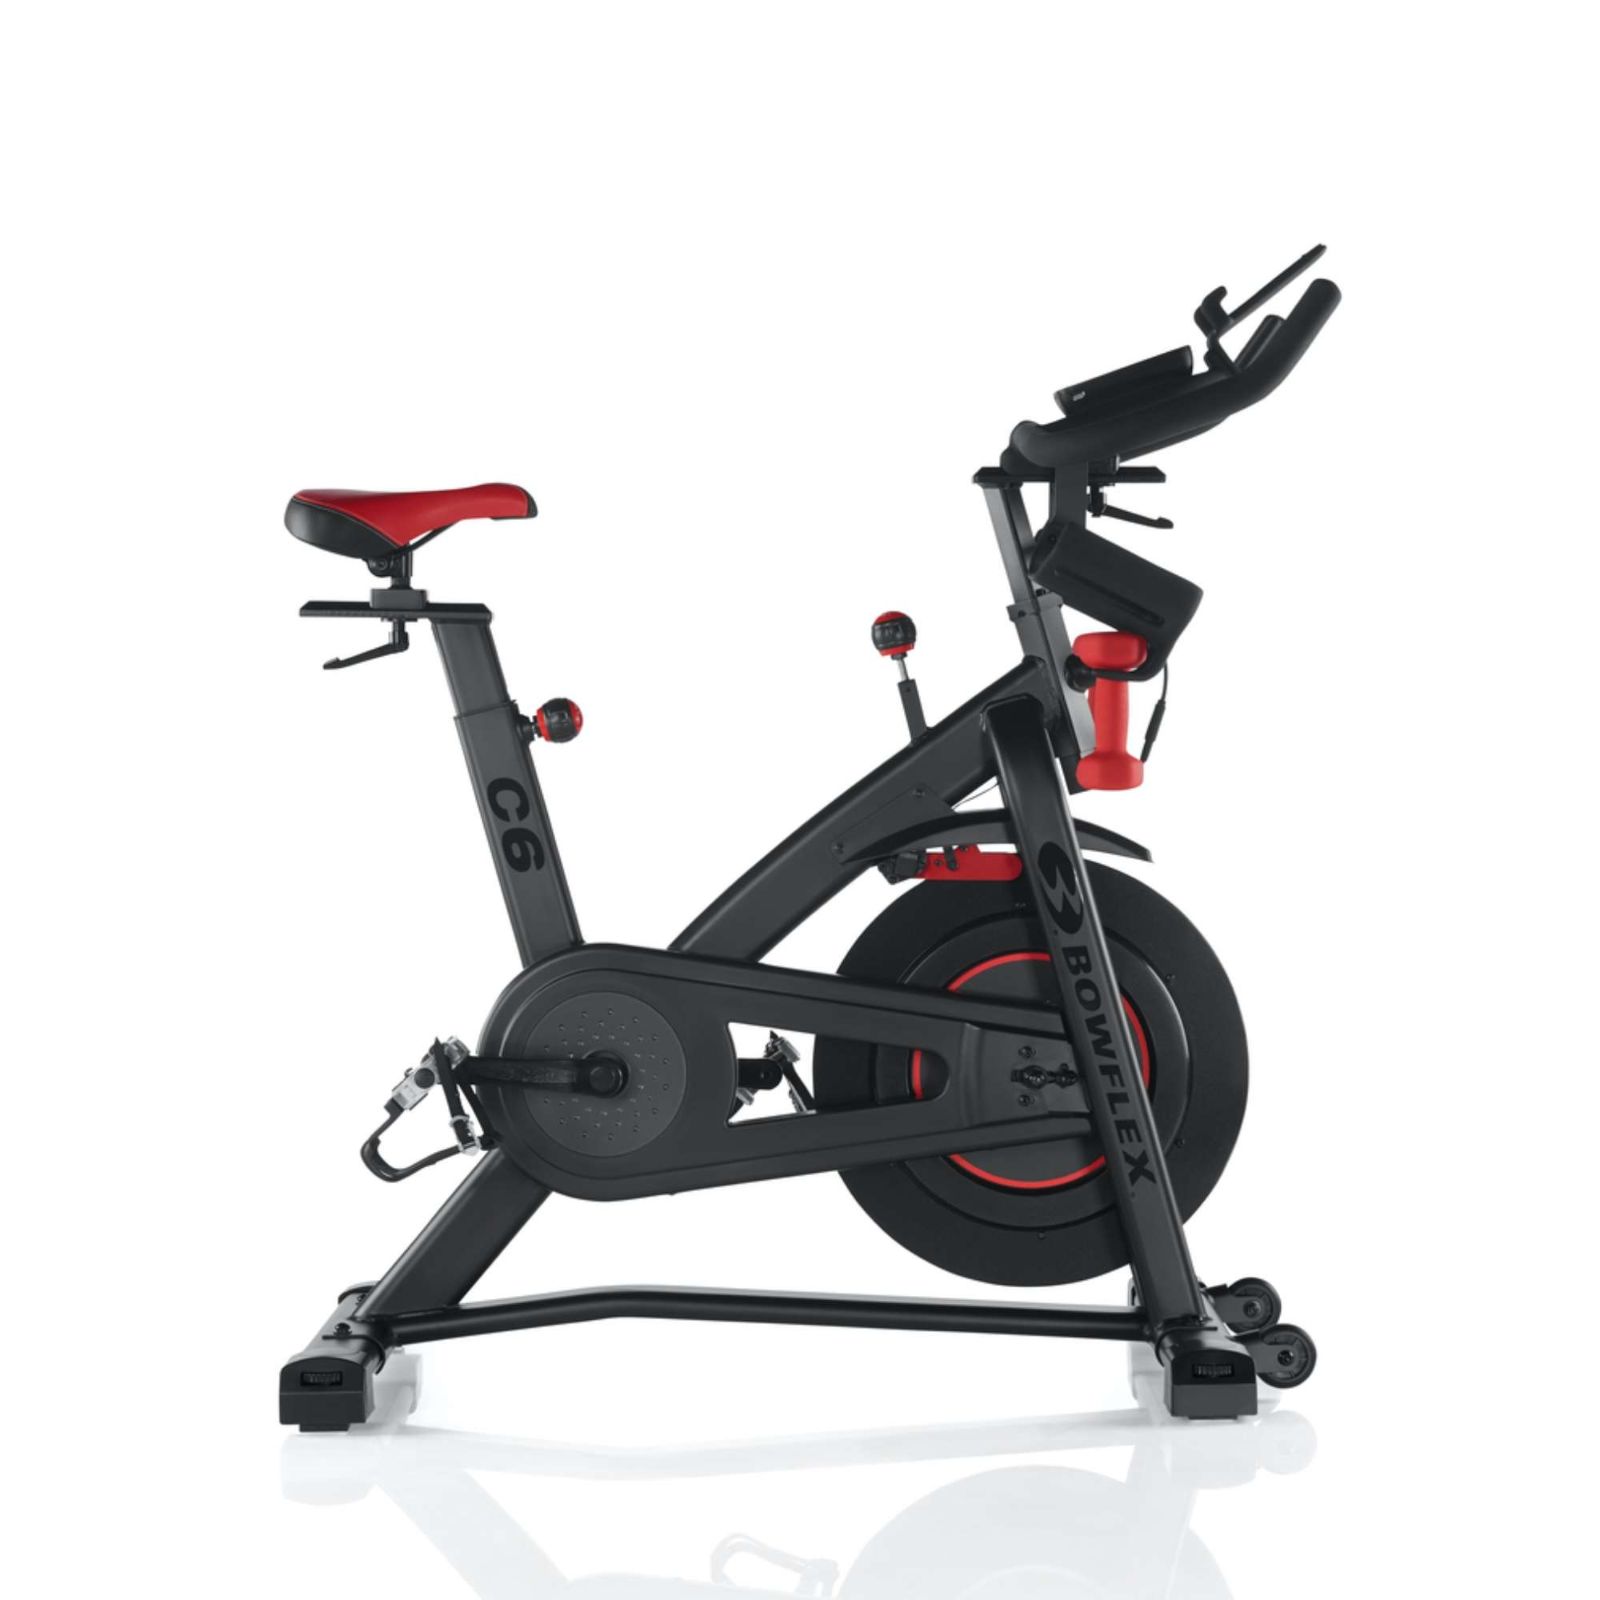 Bowflex C6 Bike, Cardio Equipment, Spin Bikes, Bowflex, Buy Fitness  Equipment, Gym Accessories Online, We Ship Anywhere in Canada from Surrey,  BC